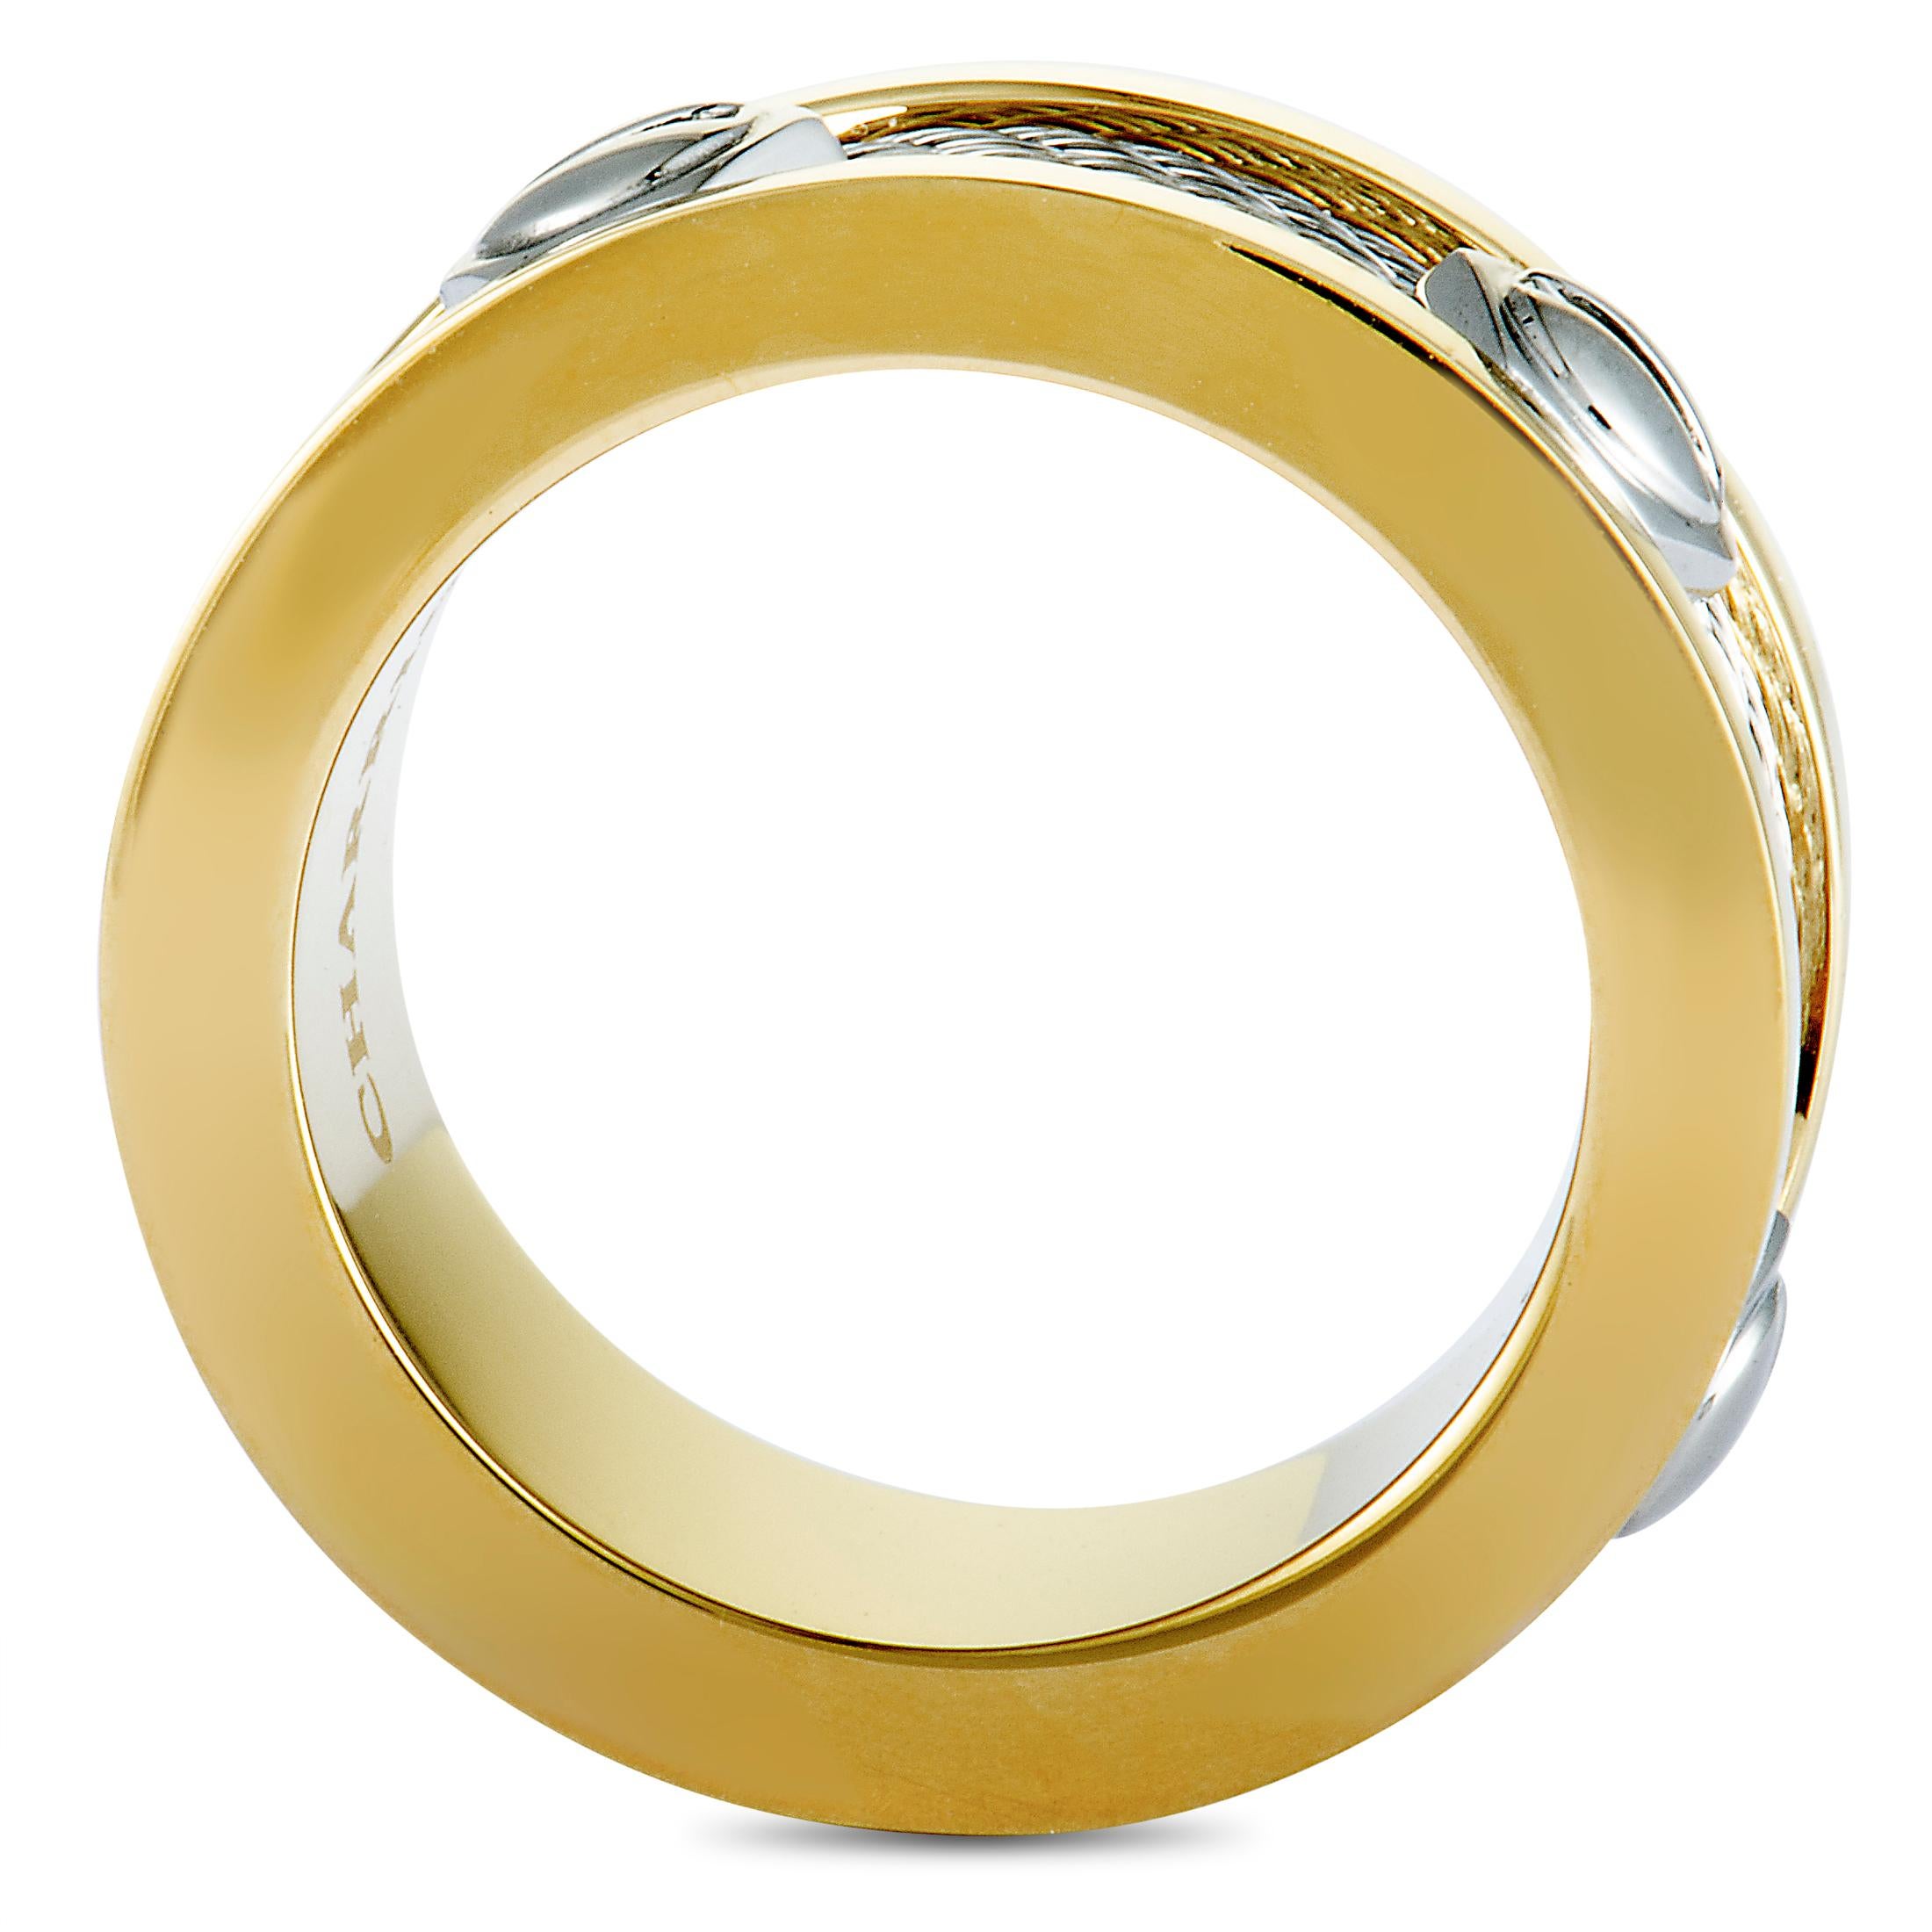 This compelling “Forever” ring is presented by Charriol and it is superbly crafted from stainless steel that is partially coated in yellow PVD, creating a distinctly luxurious and incredibly eye-catching look.
Ring Size: 10, 10.75